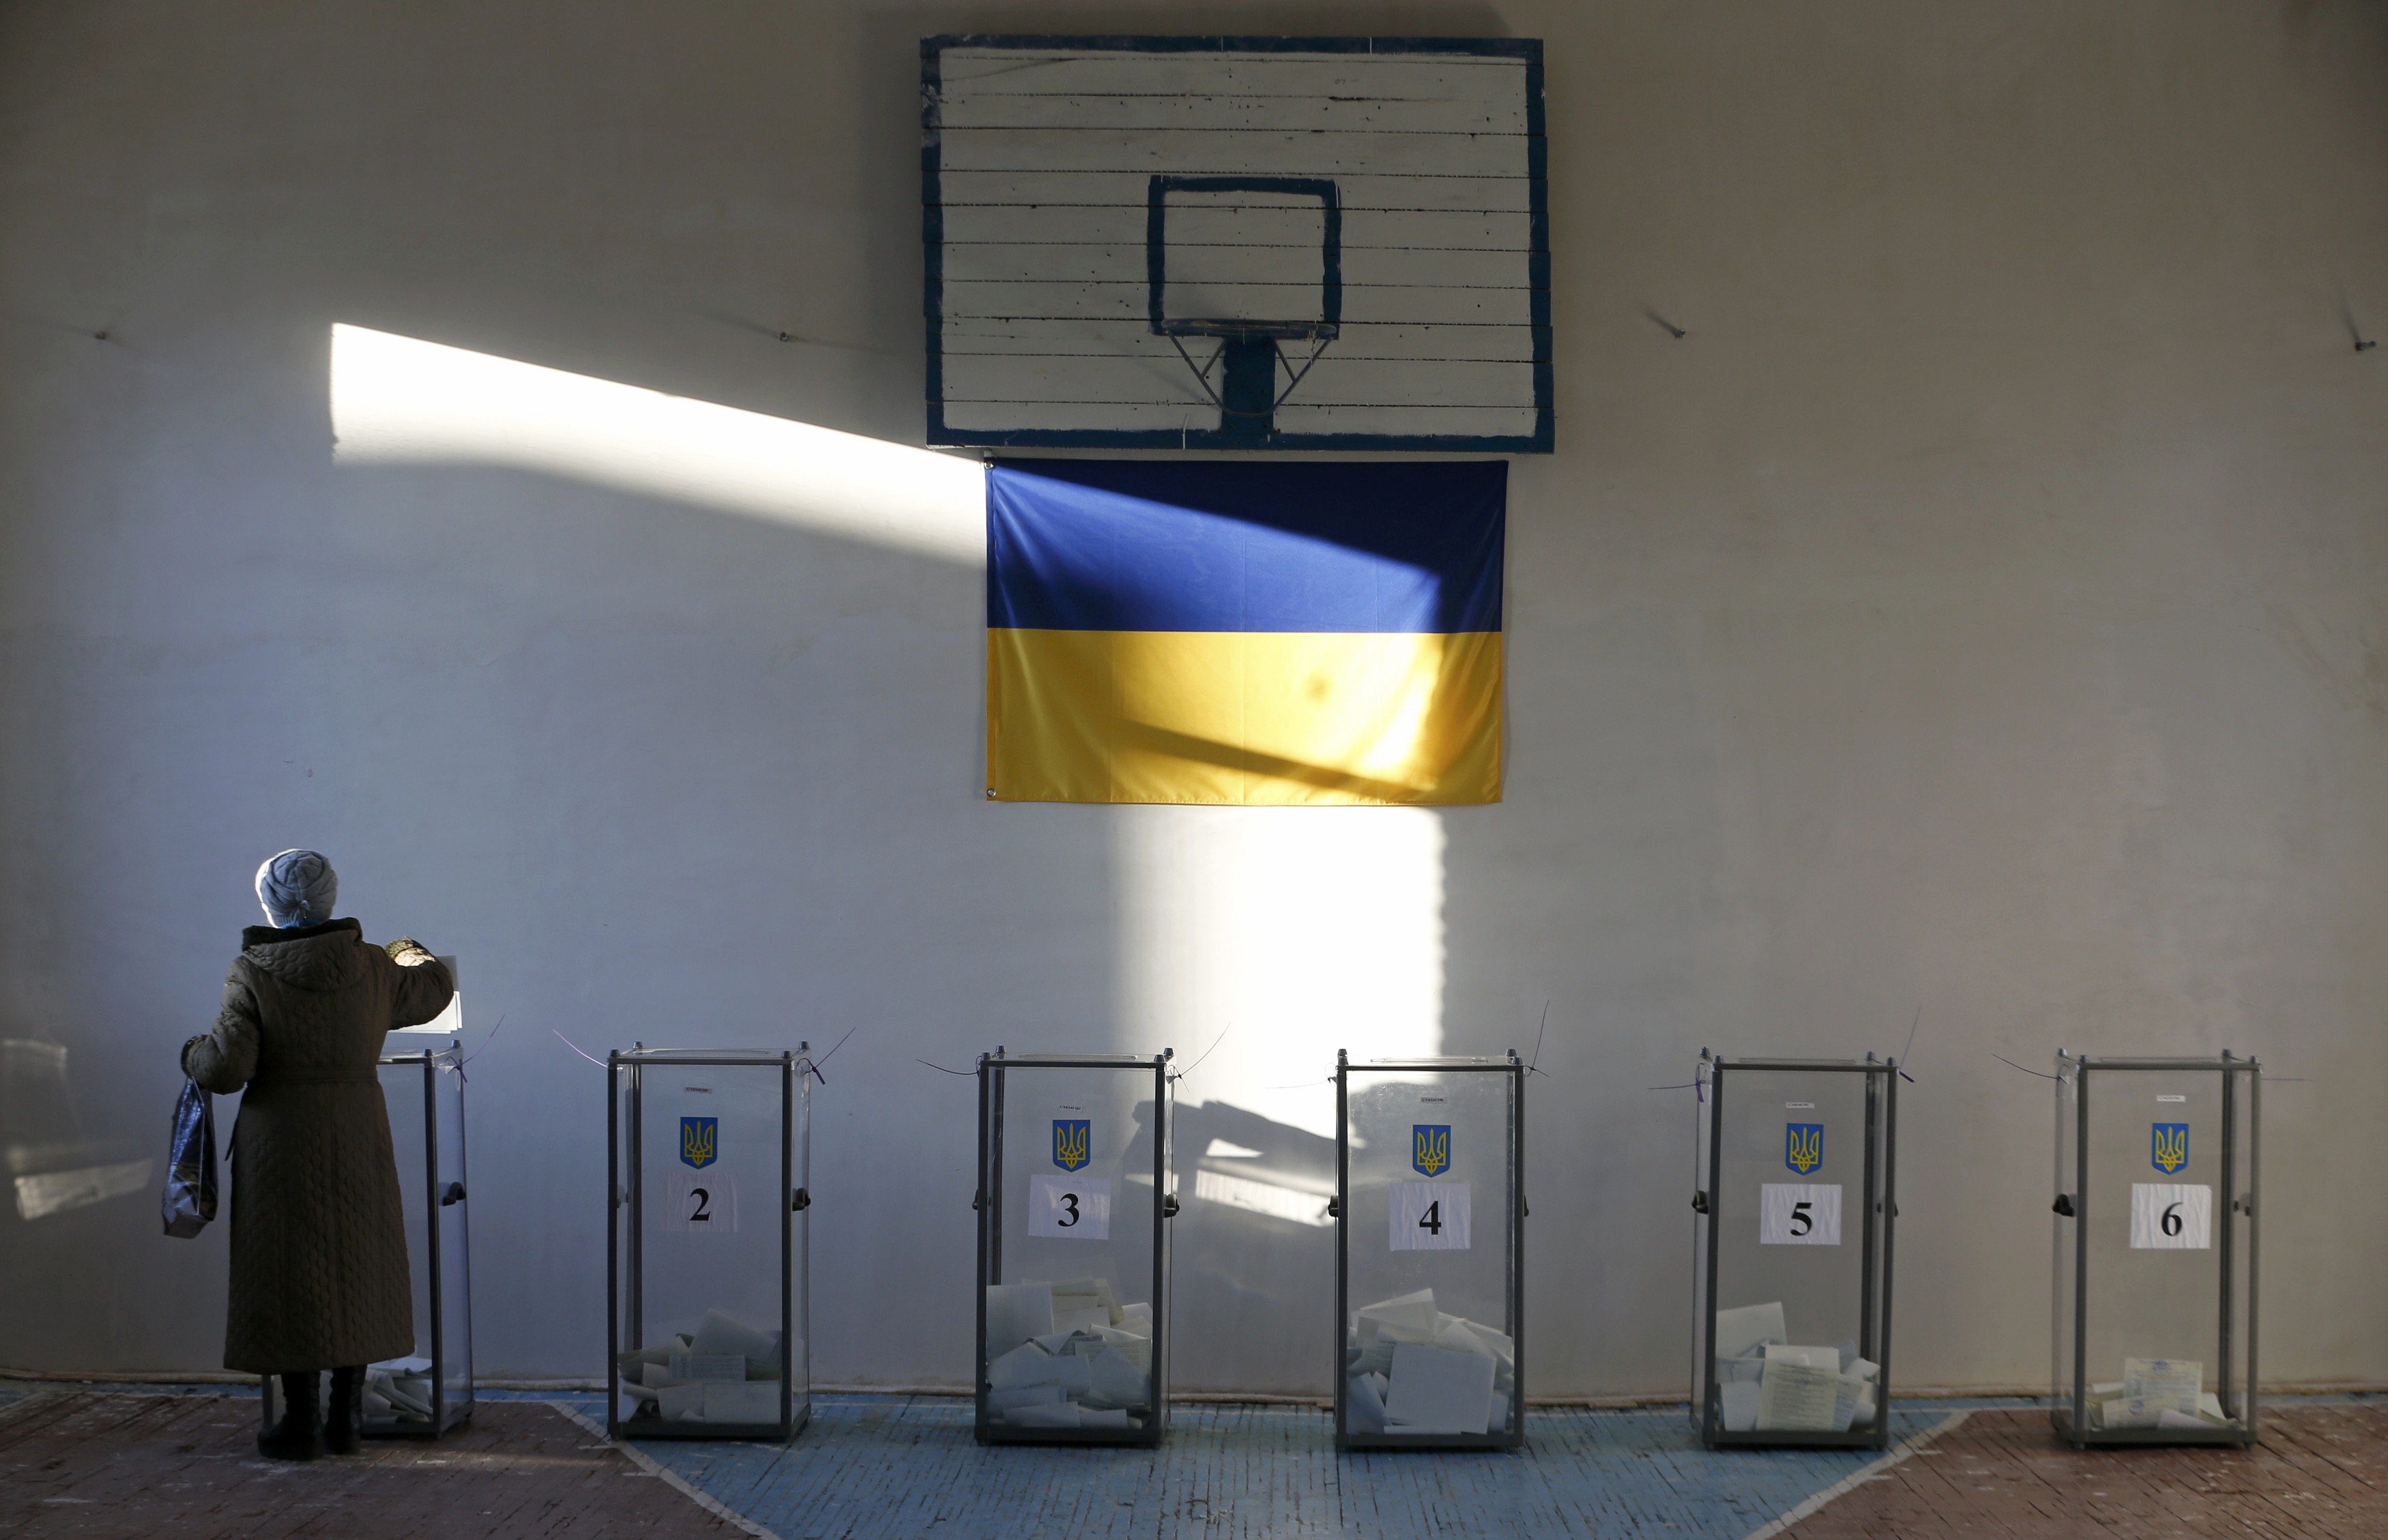 A woman casts a ballot during a parliamentary election at a school gym in the village of Semyonovka near Slaviansk, eastern Ukraine, October 26, 2014. Ukrainians voted on Sunday in an election that is likely to install a pro-Western parliament and strengthen President Petro Poroshenko's mandate to end separatist conflict in the east, but may fuel tension with Russia. REUTERS/Vasily Fedosenko (UKRAINE - Tags: POLITICS ELECTIONS TPX IMAGES OF THE DAY)